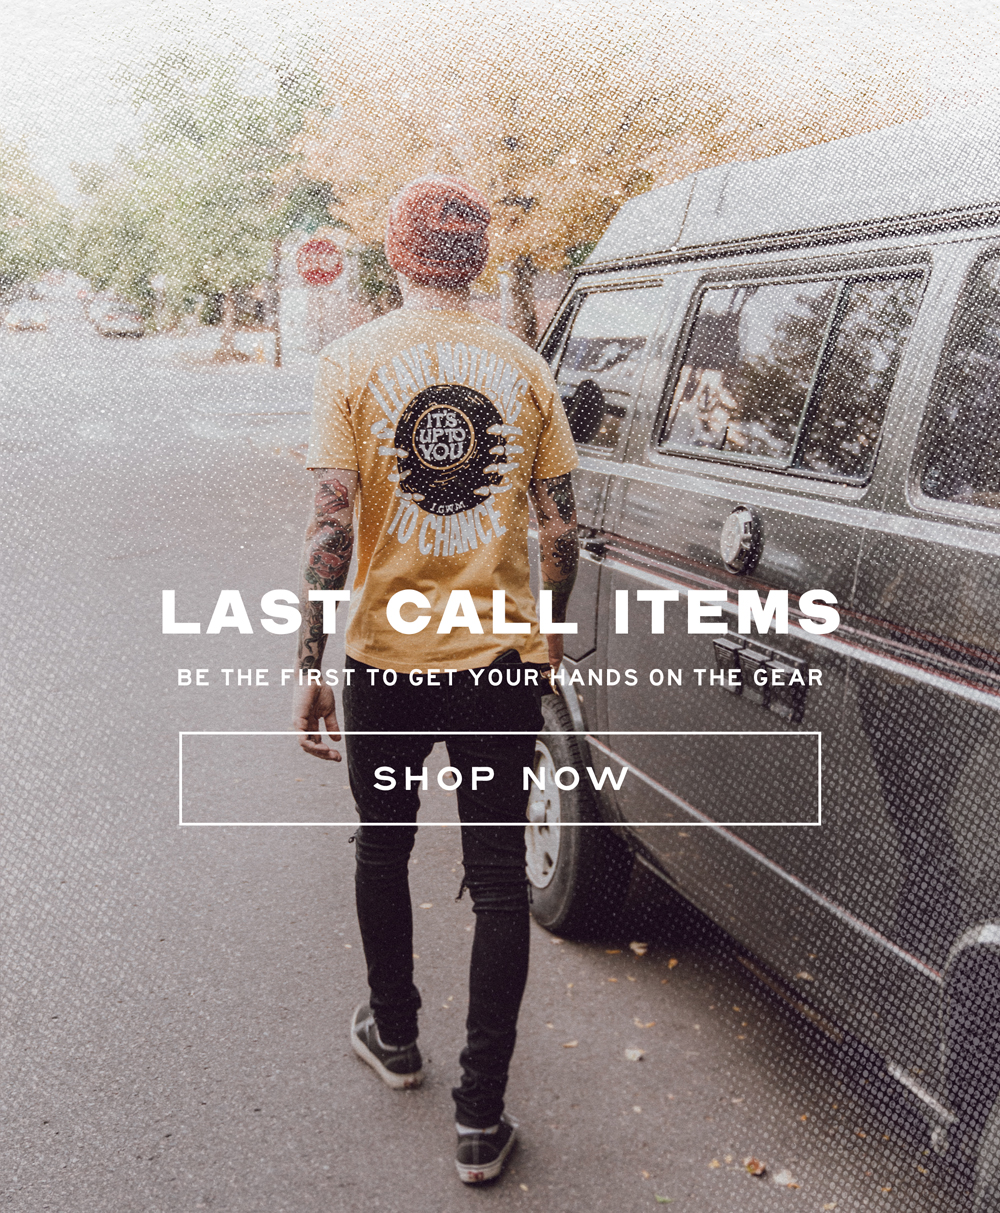 Last call items. Be the first to get your hands on the gear.